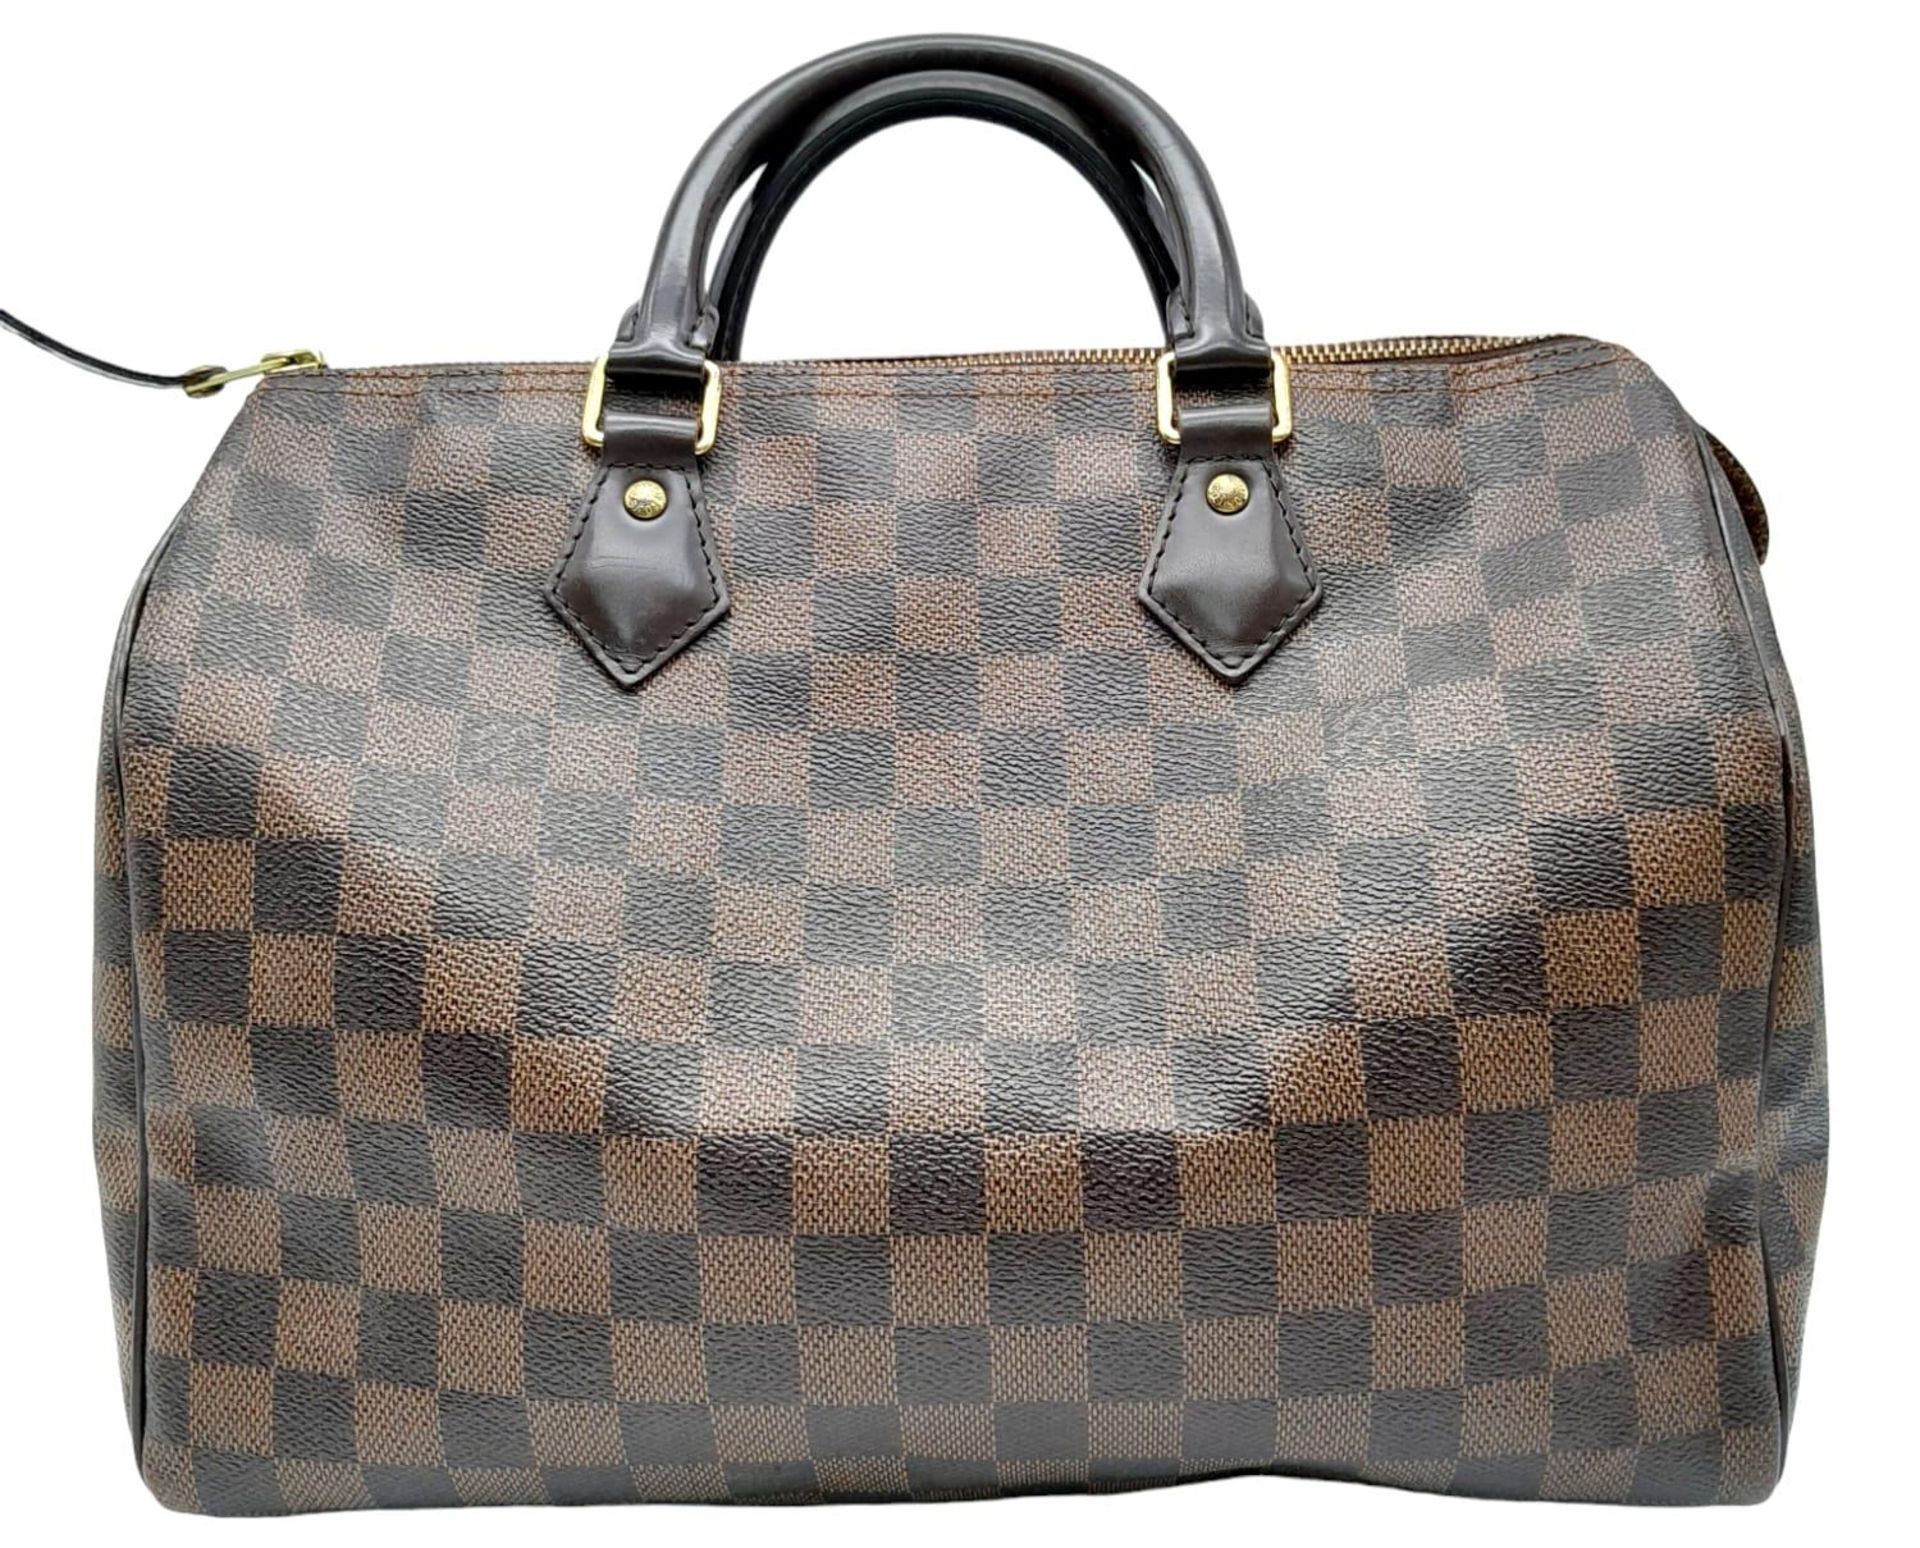 A Louis Vuitton Speedy Bag. Checked LV canvas exterior. Red textile interior. Comes with dust cover, - Image 3 of 12